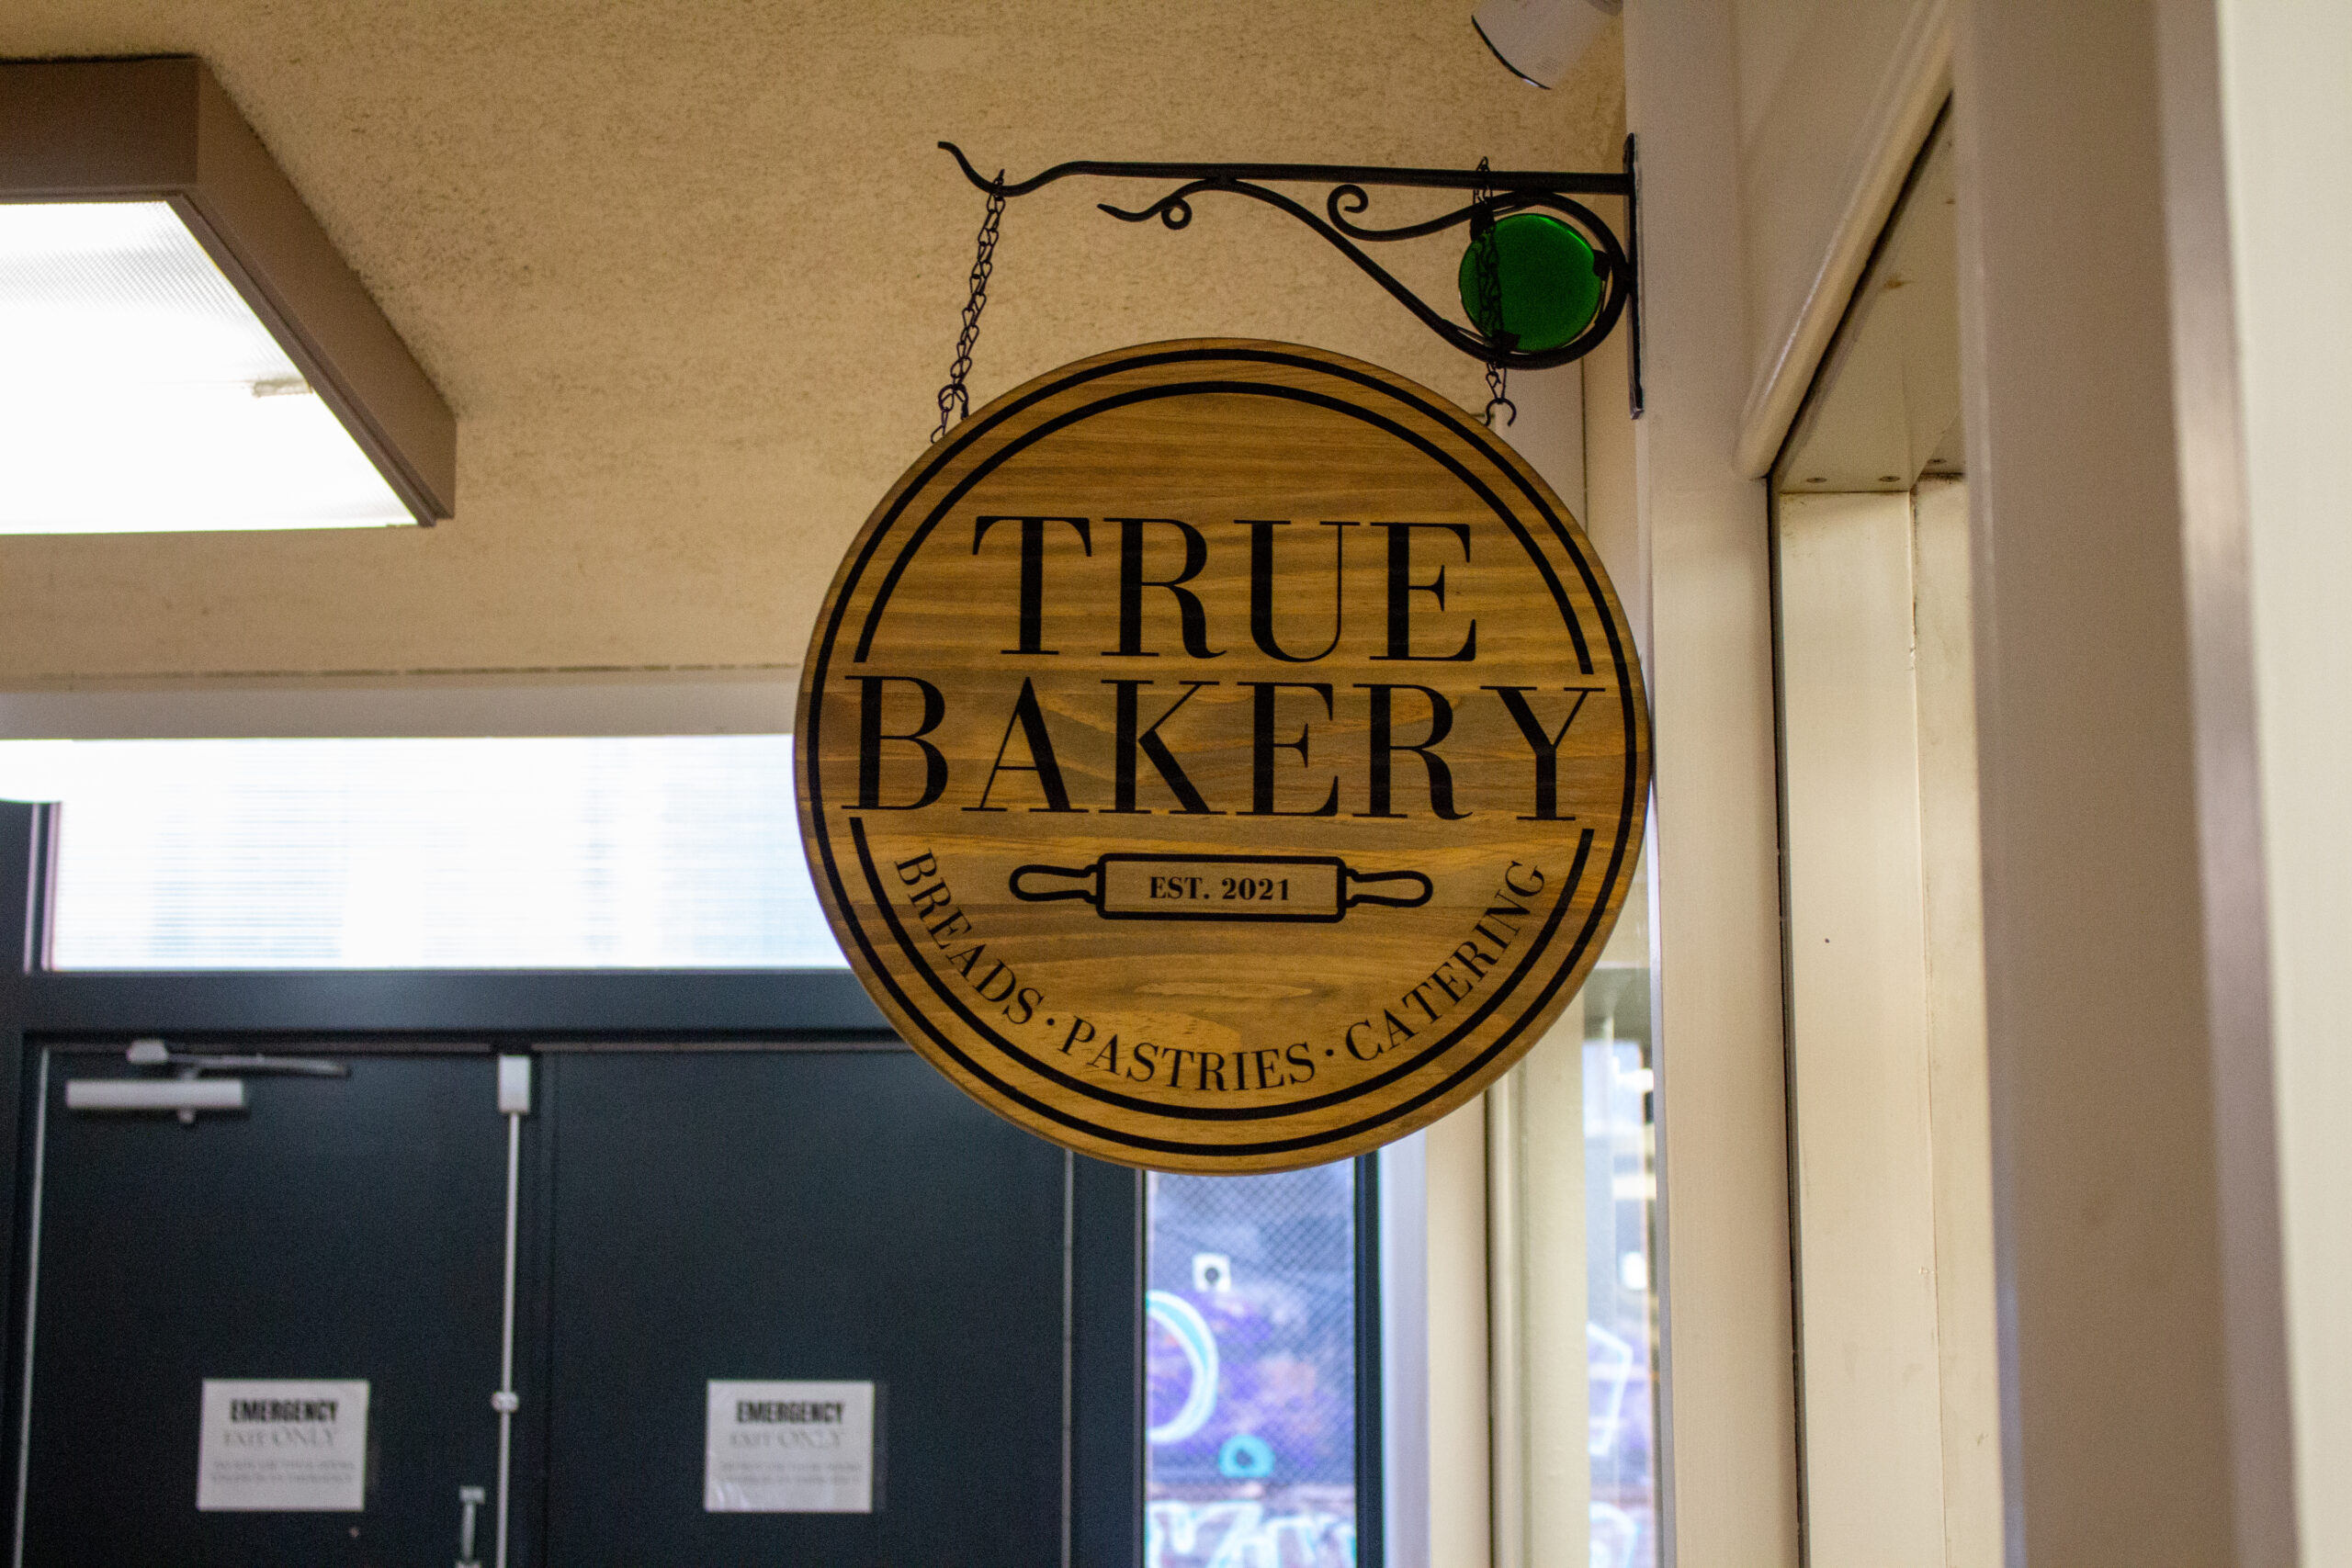 True Bakery LLC sign for the organic bakery in downtown Casper, Wyoming.